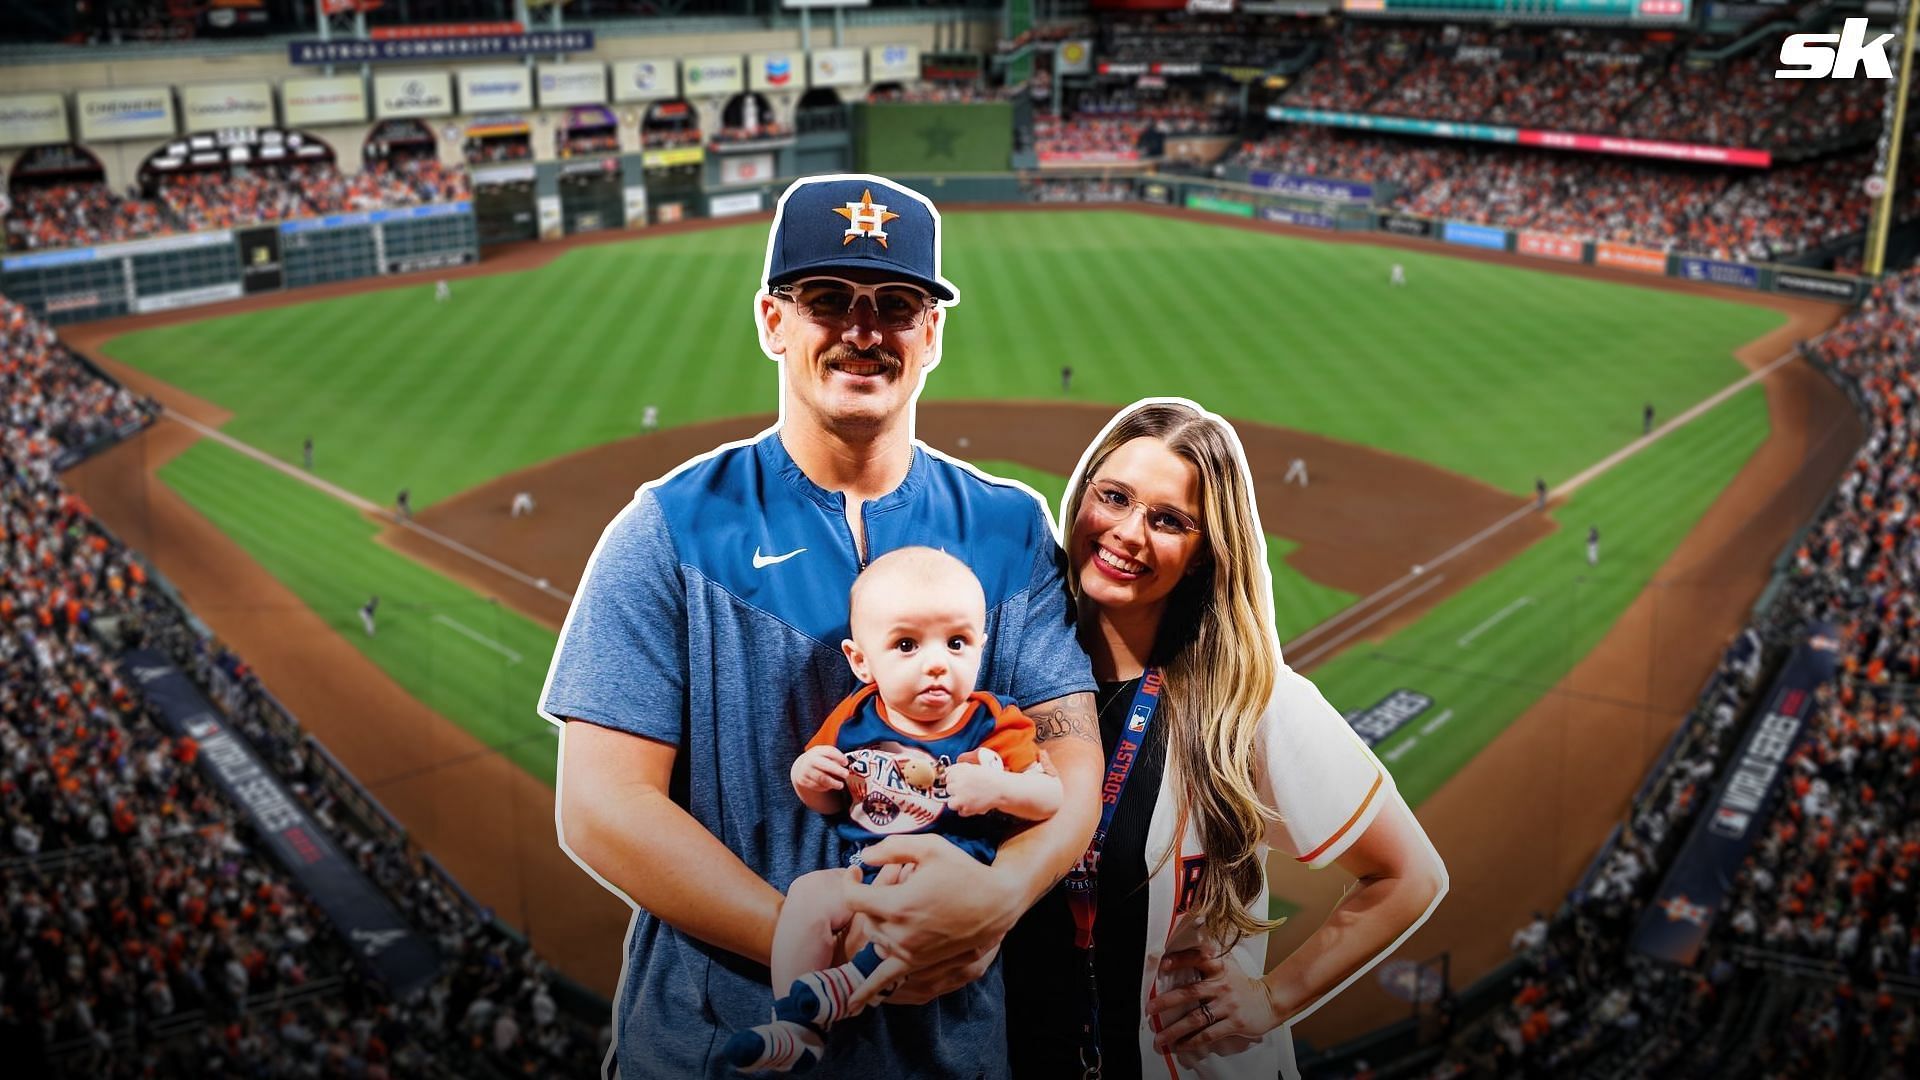 Houston Astros pitcher J.P. France, his wife Jessica, and their child Liam